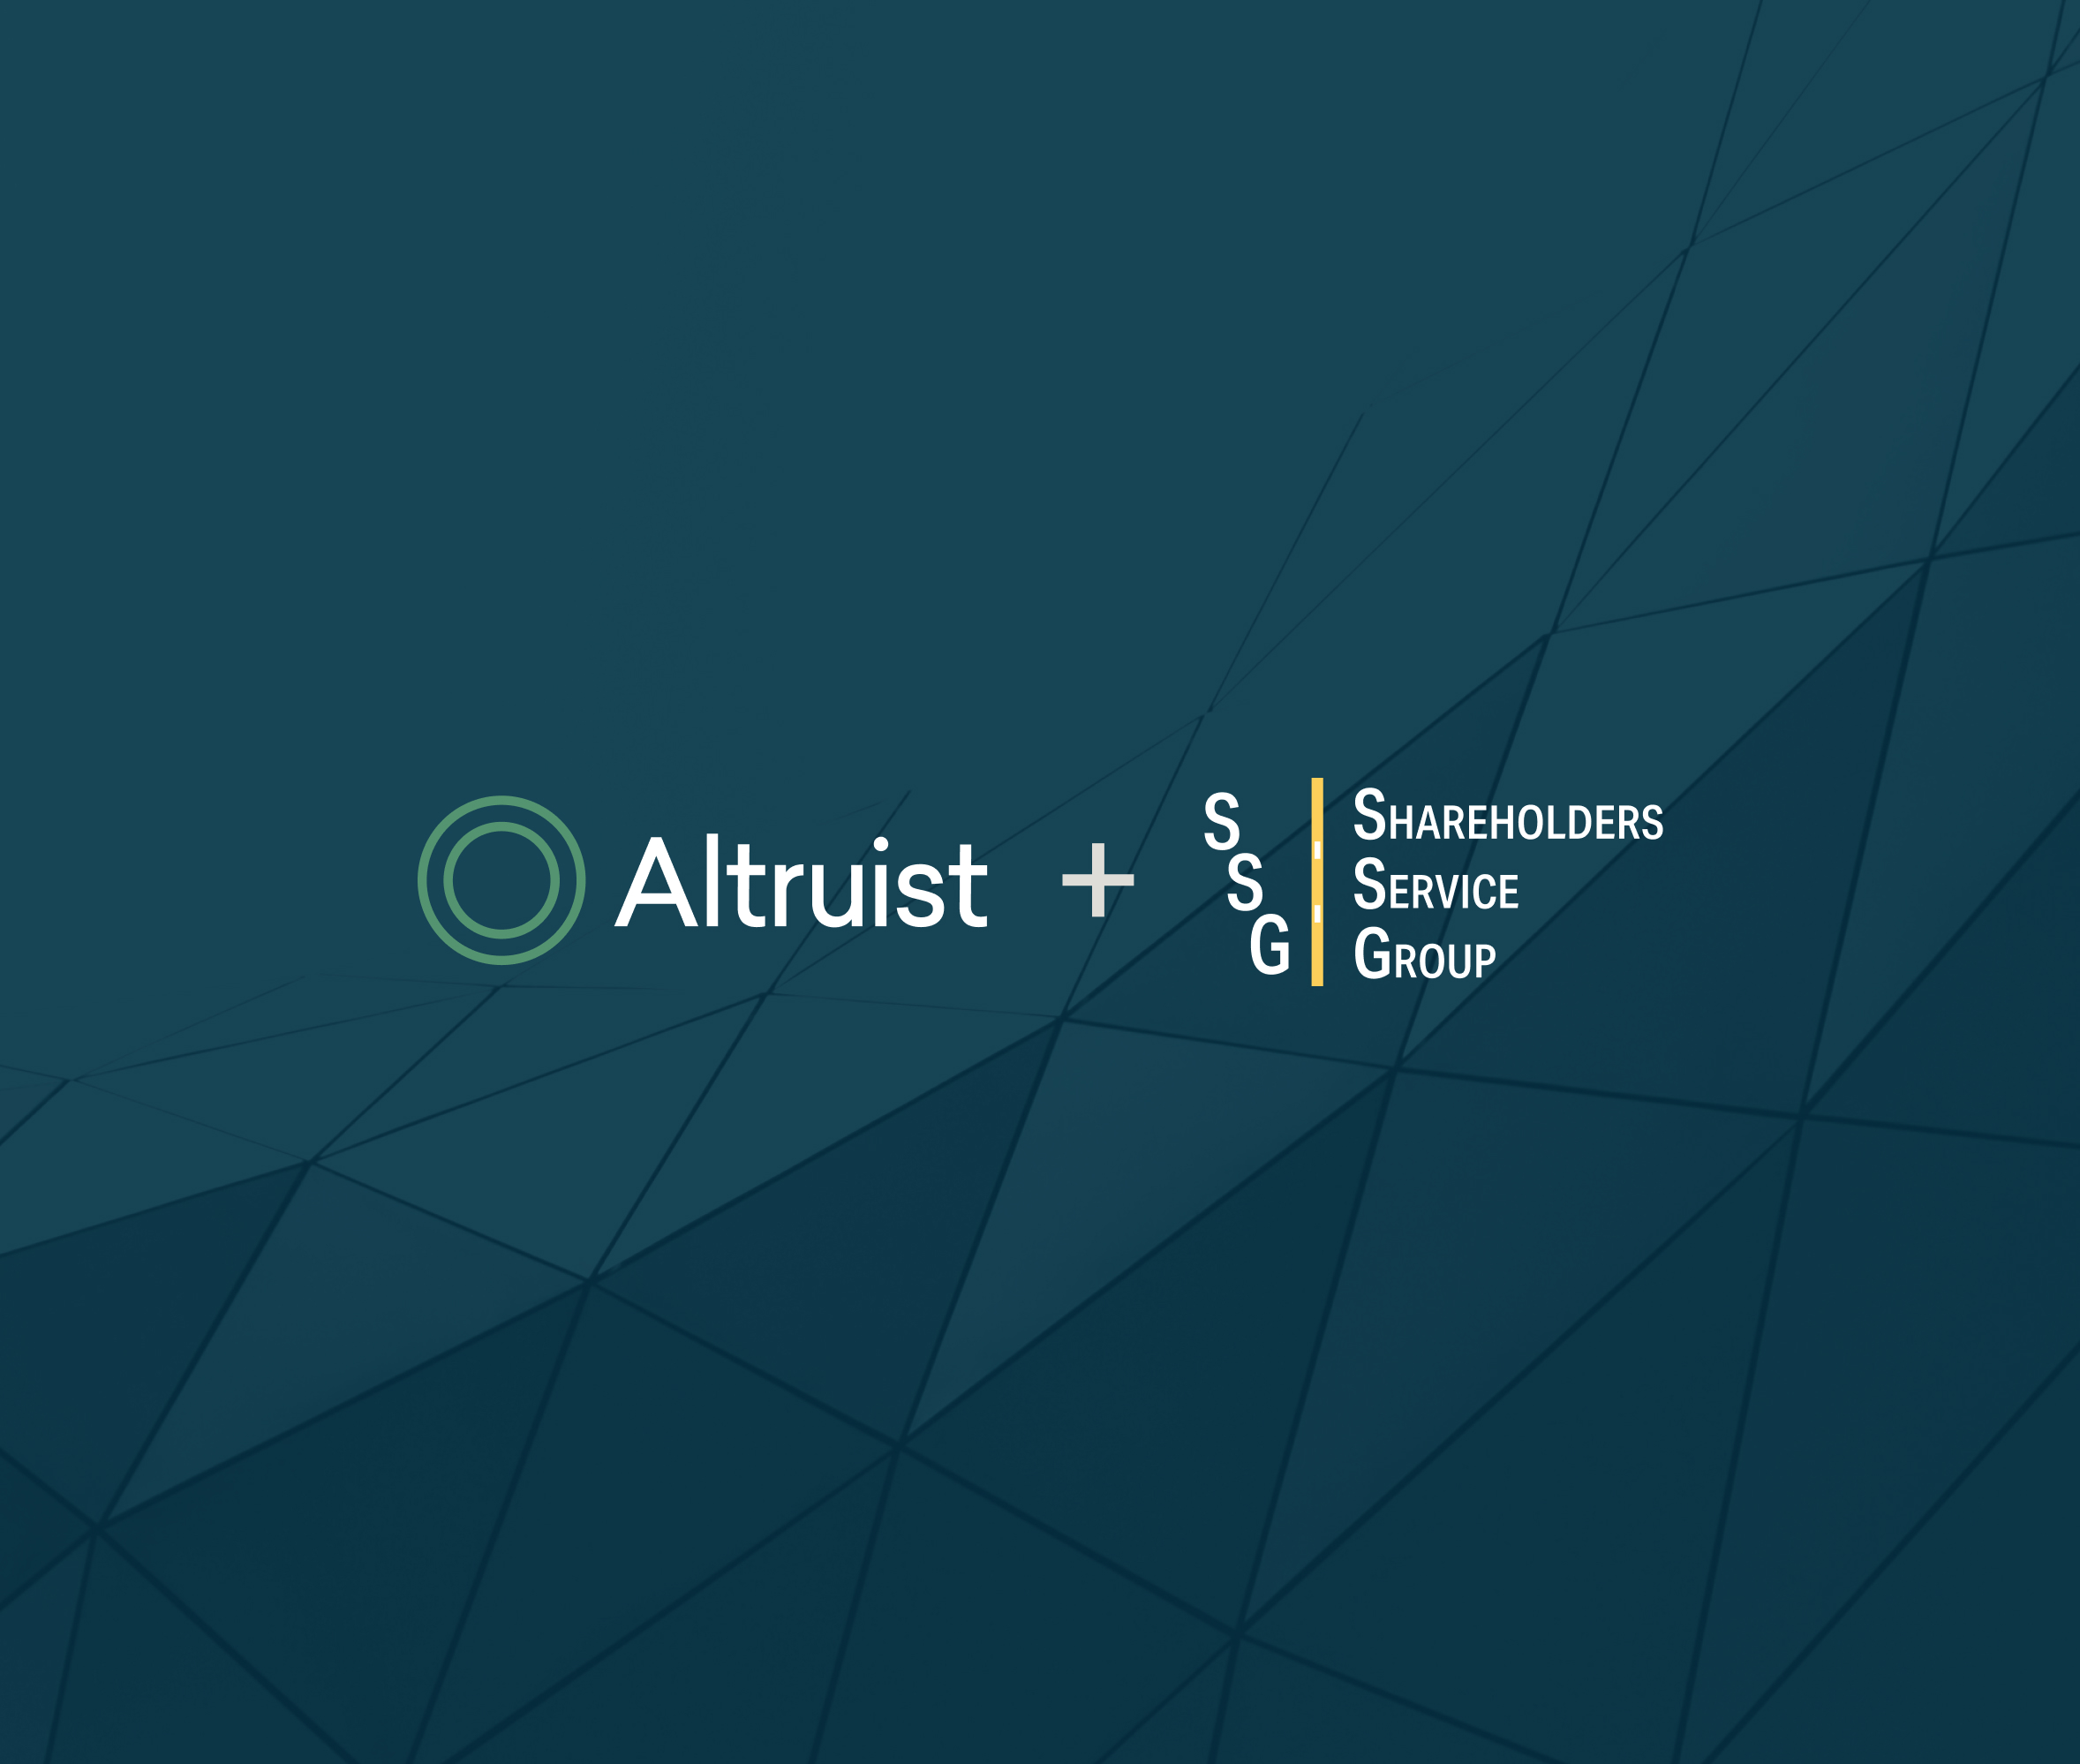 Altruist and Shareholders Service Group